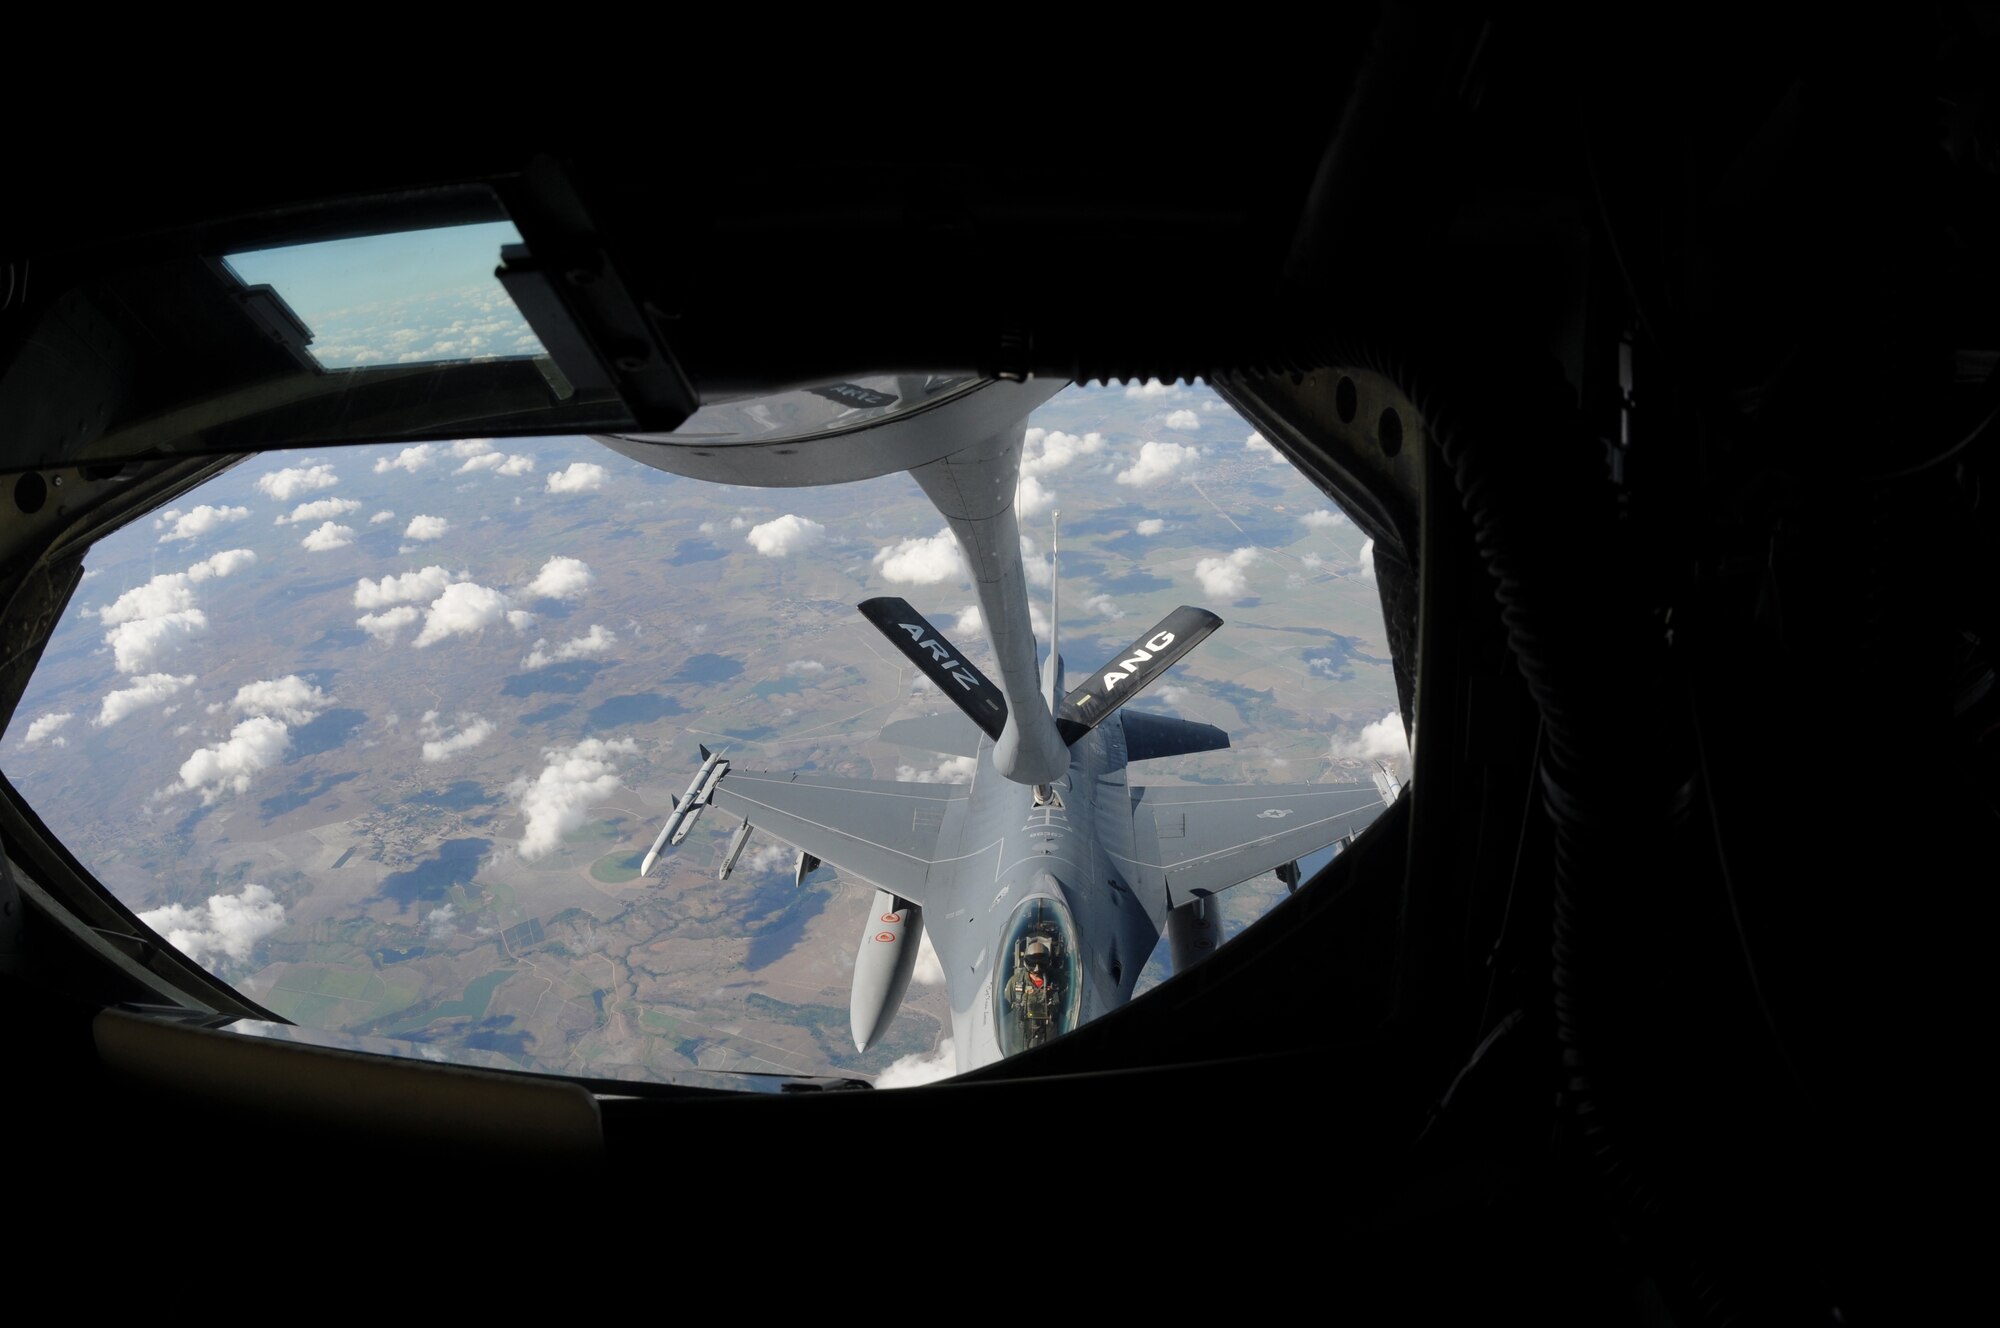 A Chilean F-16 receives fuel from a KC-135 Stratotanker from the 161st Air Refueling Wing, Phoenix, Ariz., November 12, 2010, near Natal, Brazil. The 161st ARW is participating CRUZEX V, or Cruzeiro Do Sul (Southern Cross).  CRUZEX is a multi-national combined exercise involving the Air Forces of Argentina, Brazil, Chile, France and Uruguay, and observers from numerous other countries with more than 82 aircraft and almost 3,000 Airmen involved.  U.S. Air Force Photo by Master Sgt. Kelly M. Deitloff